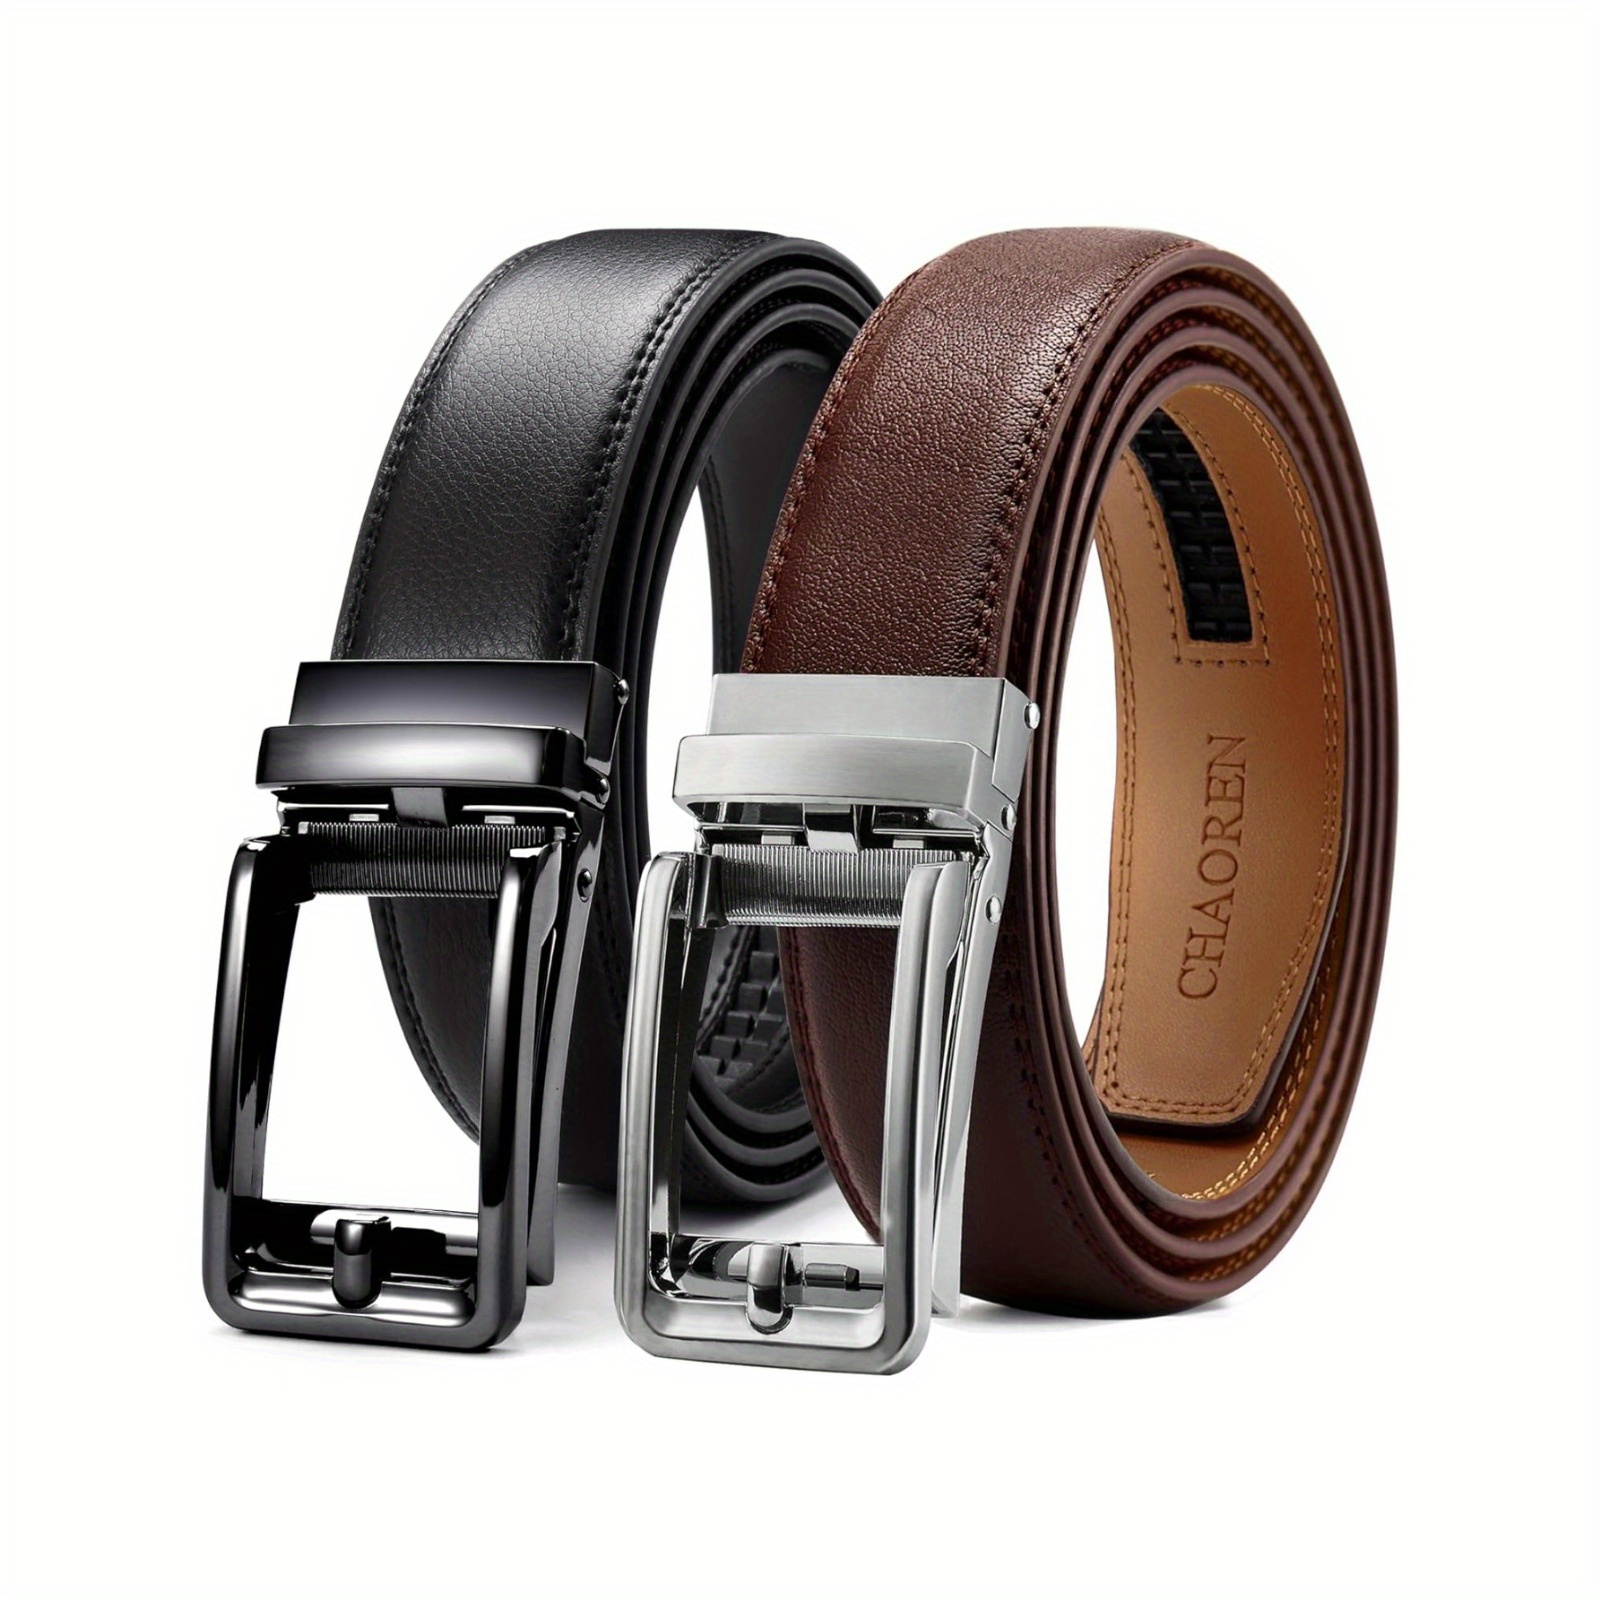 

Chaoren For Men - Mens Leather Belt 1 3/8" For Dress And Casual - Micro Adjustable Belt Fit Everywhere